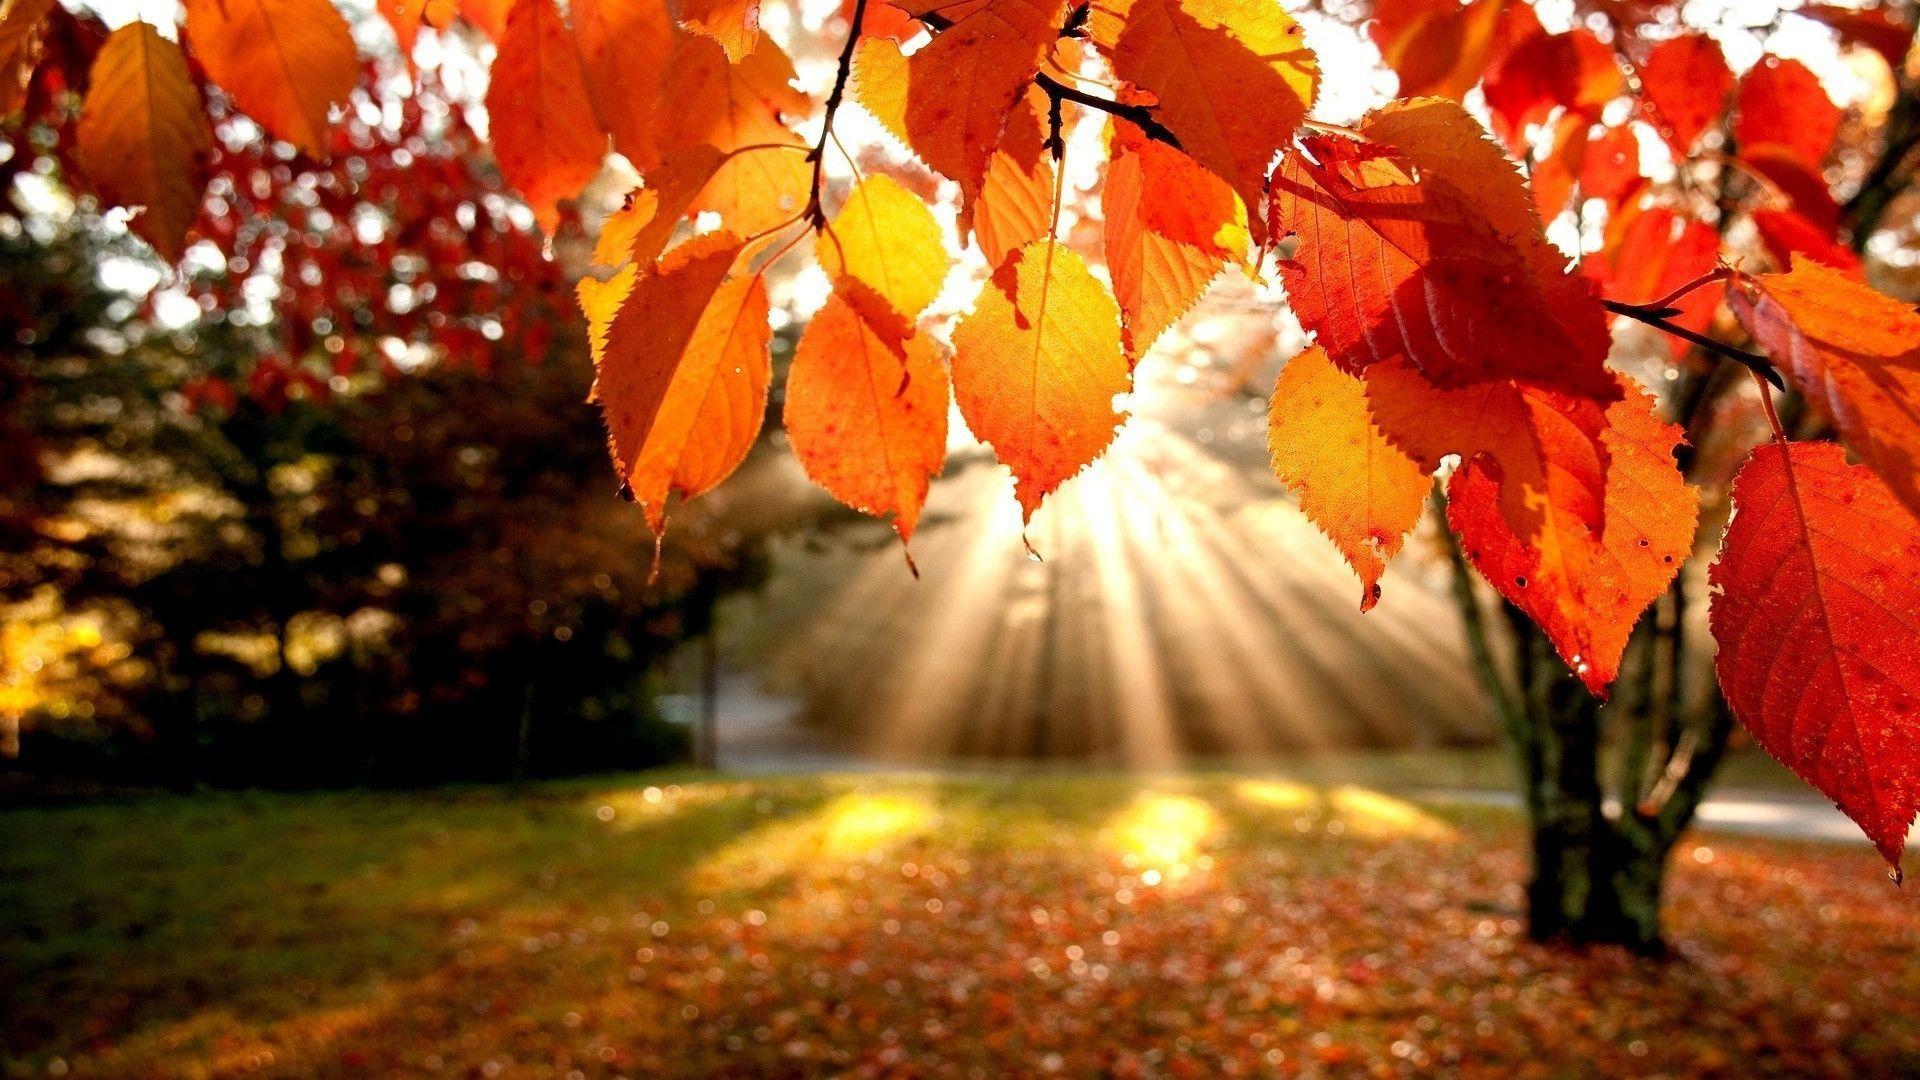 Most Beautiful Image Of Autumn Leaves For You